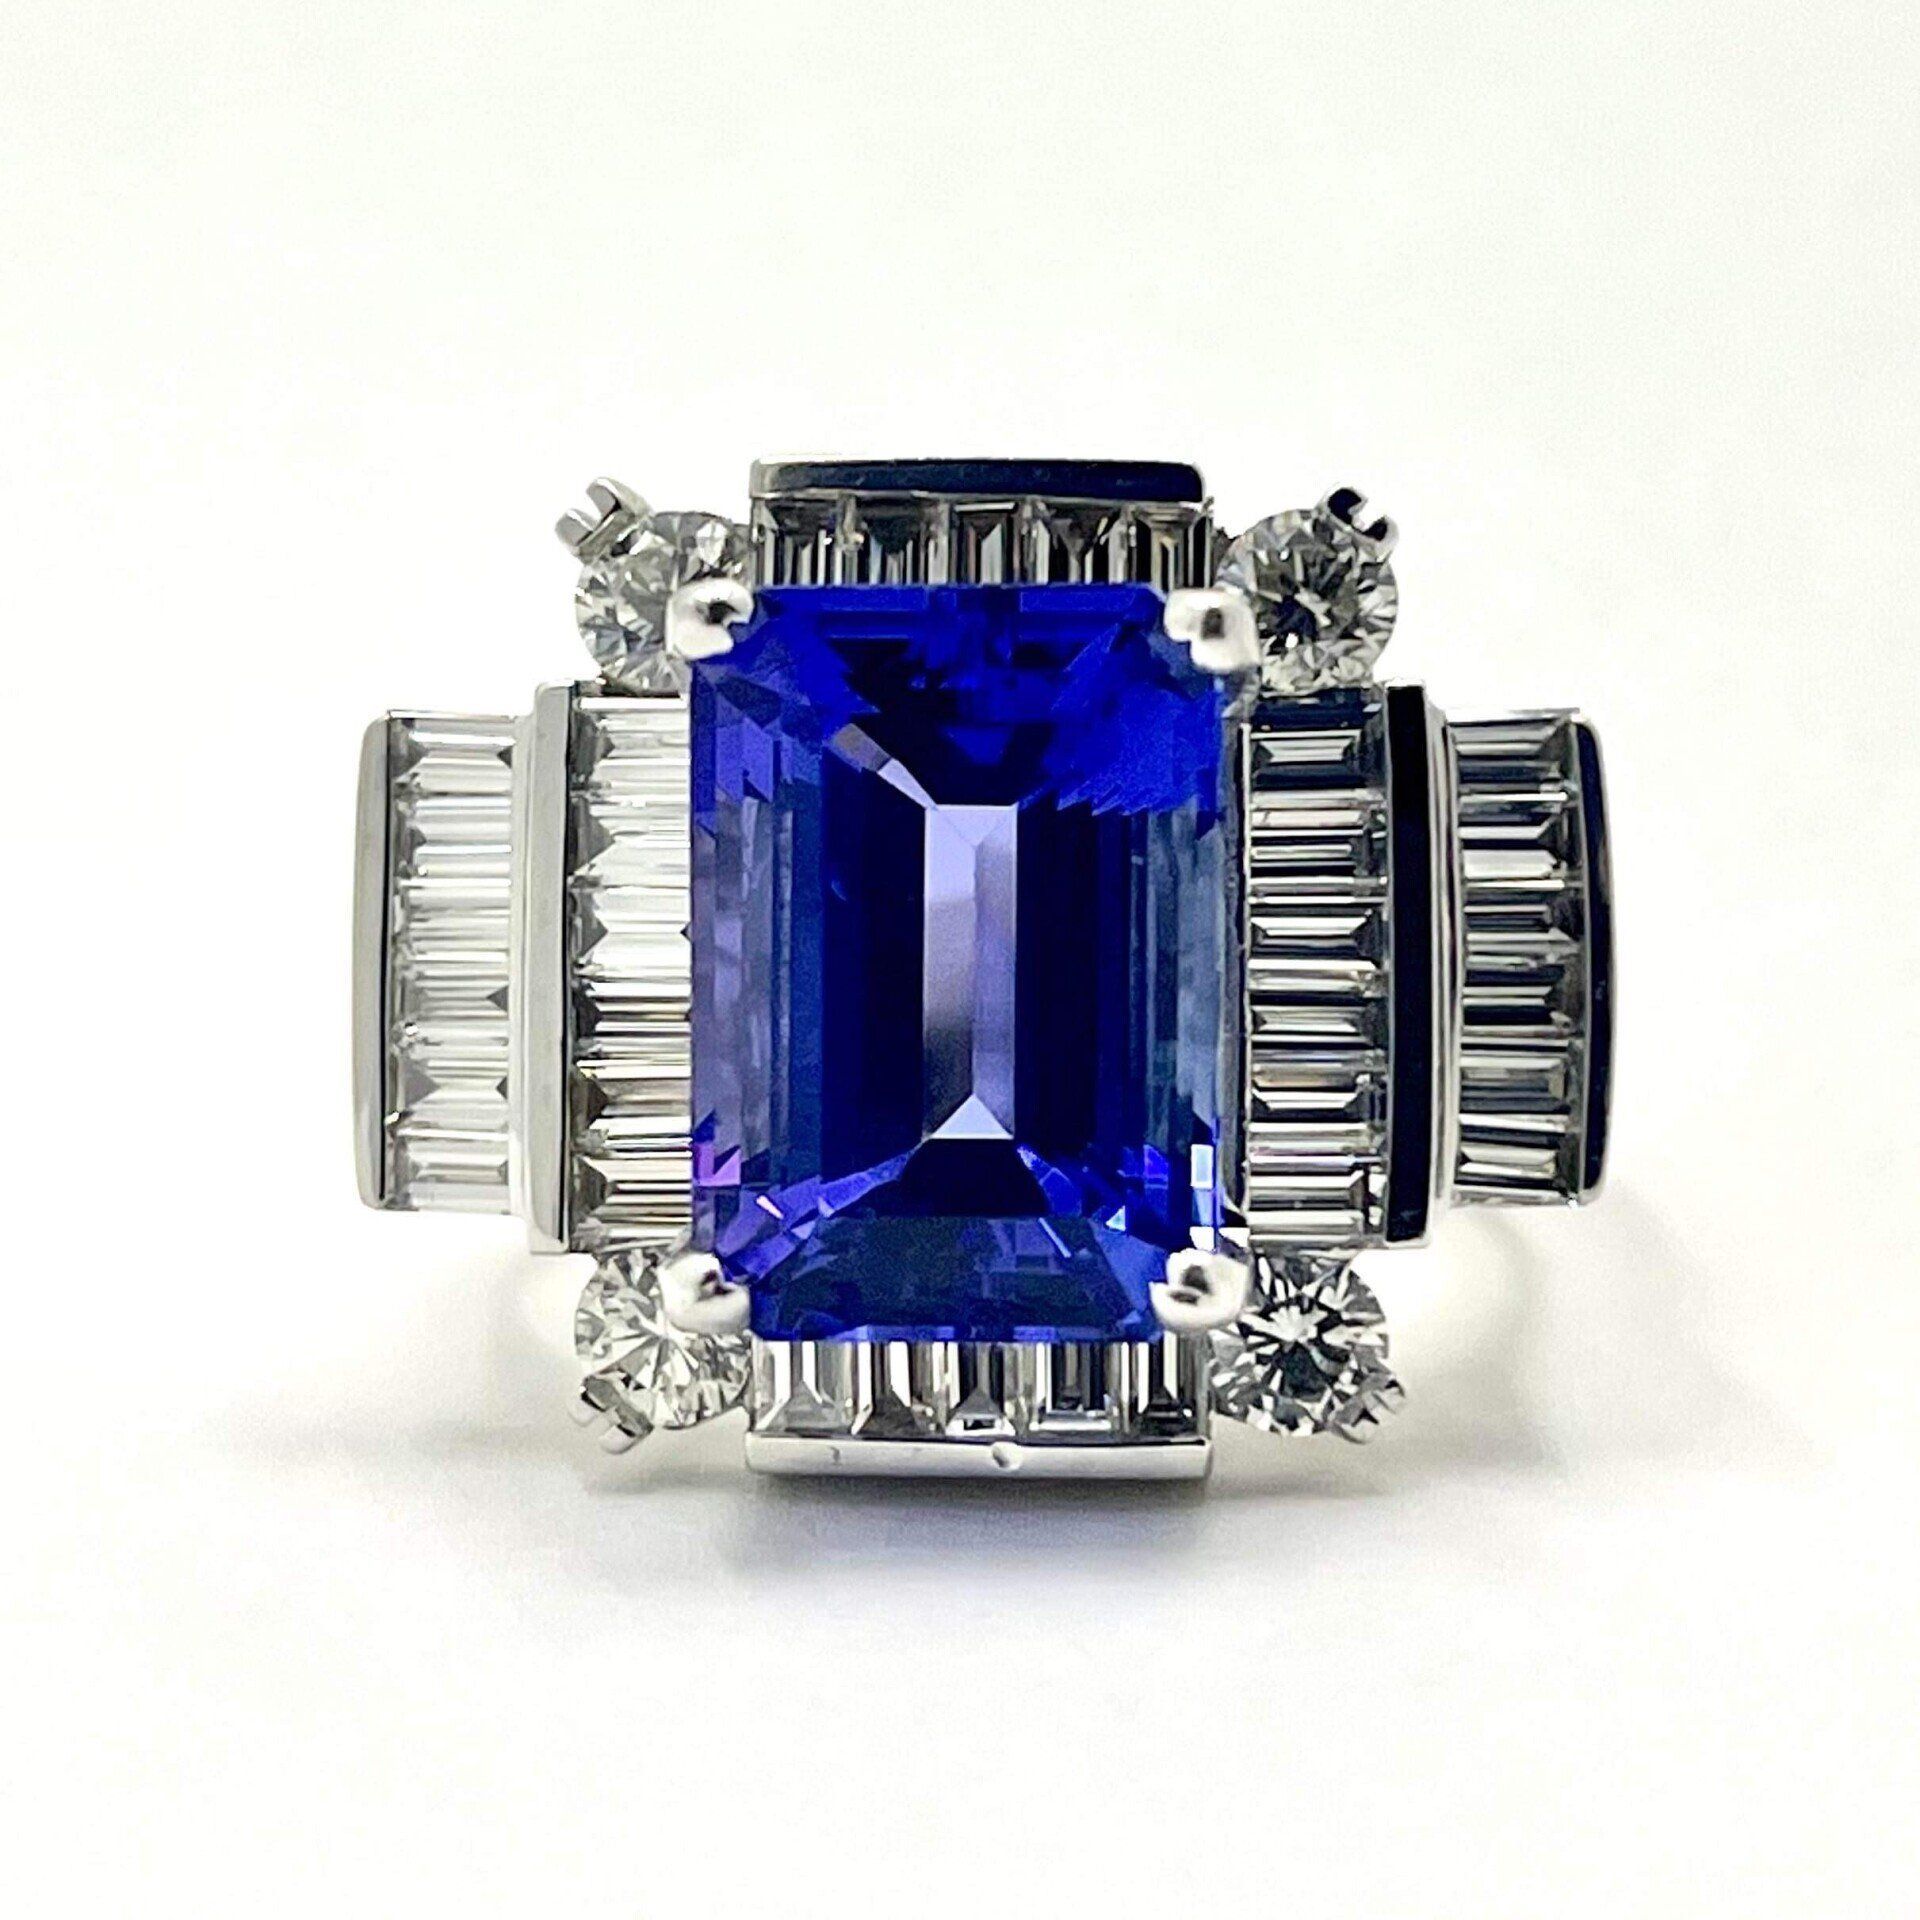 A ring with an emerald cut sapphire and baguette diamonds